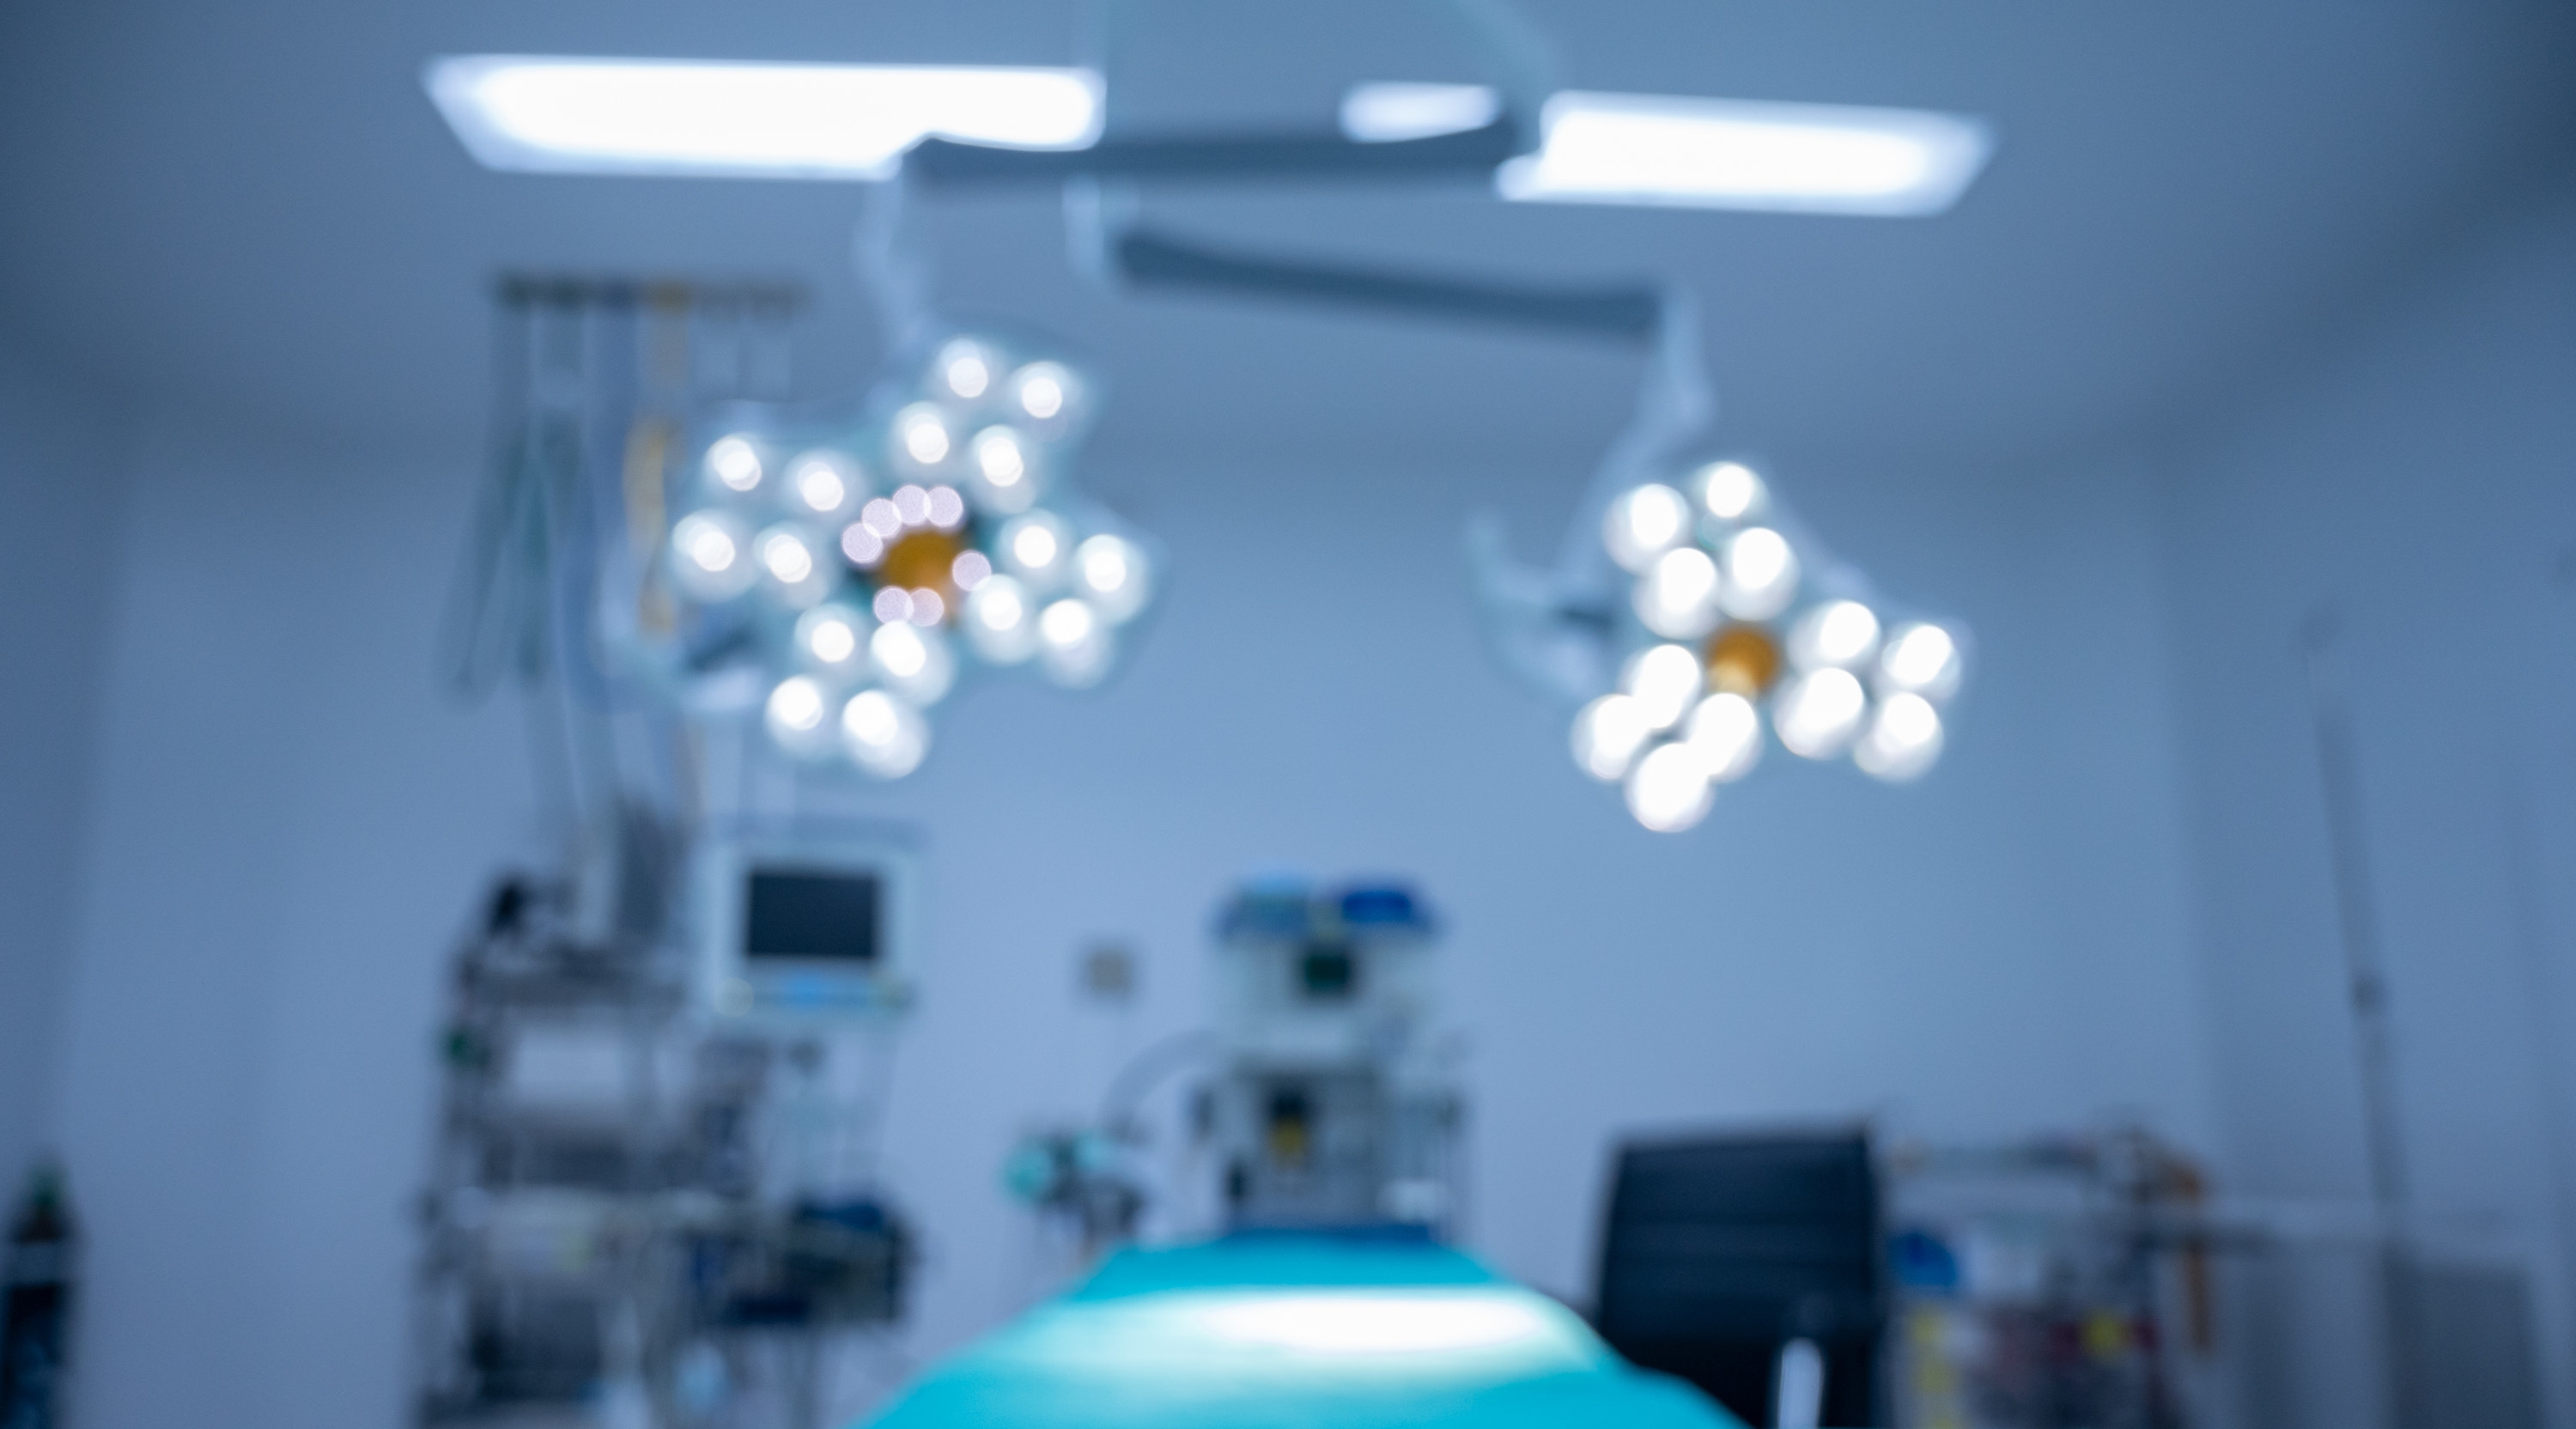 blurry picture of a surgery room